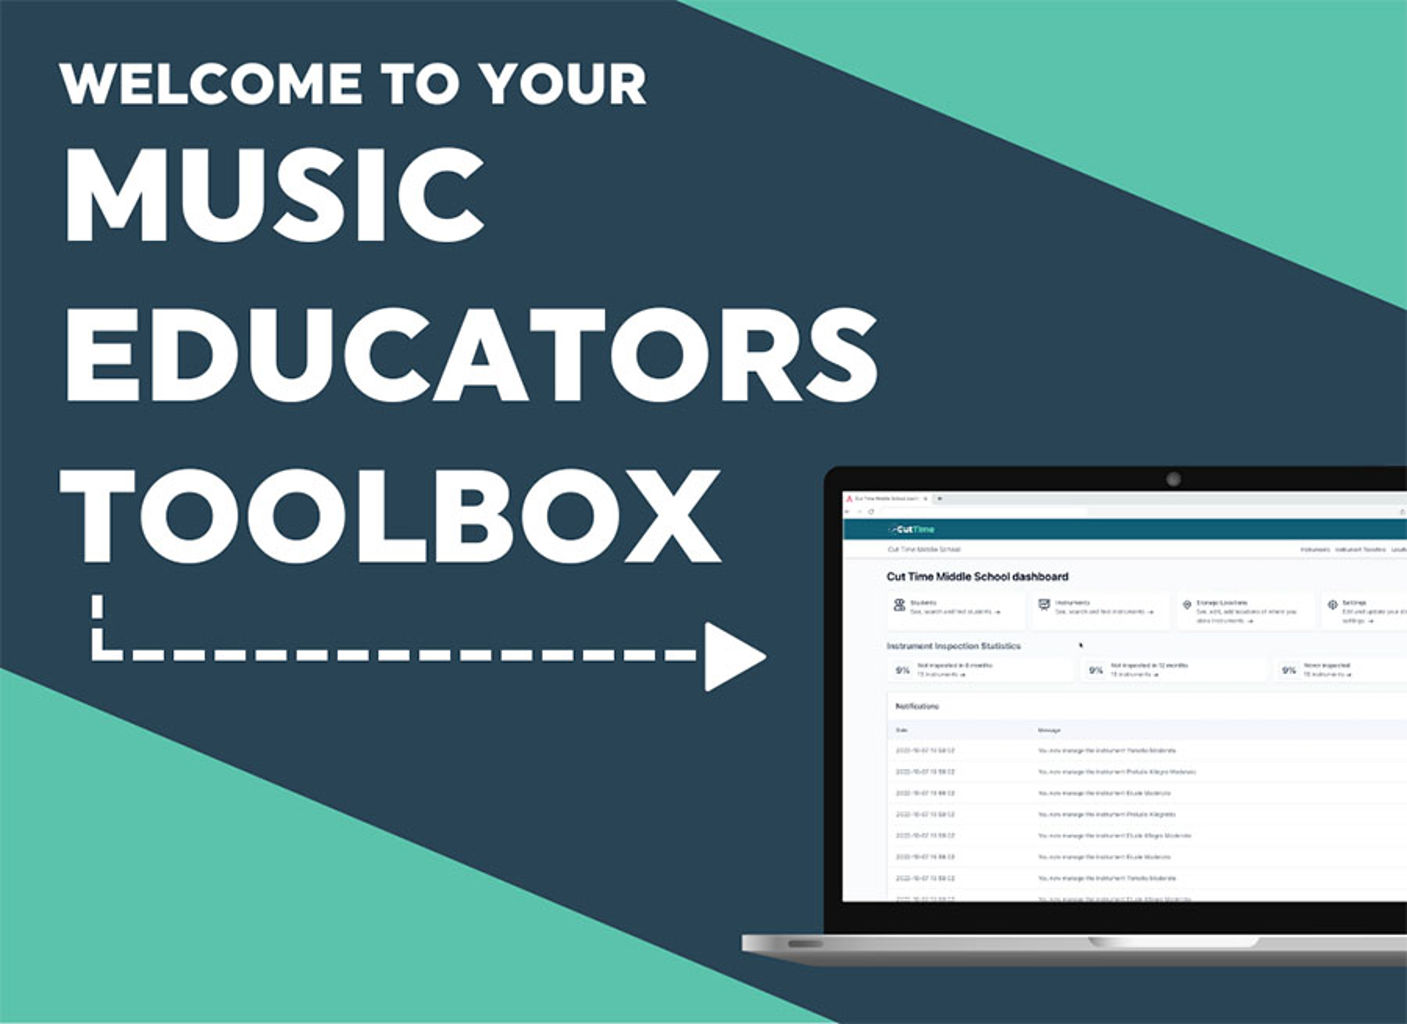 Arrow pointing to computer with the word, "Music Educator's Toolbox" on it